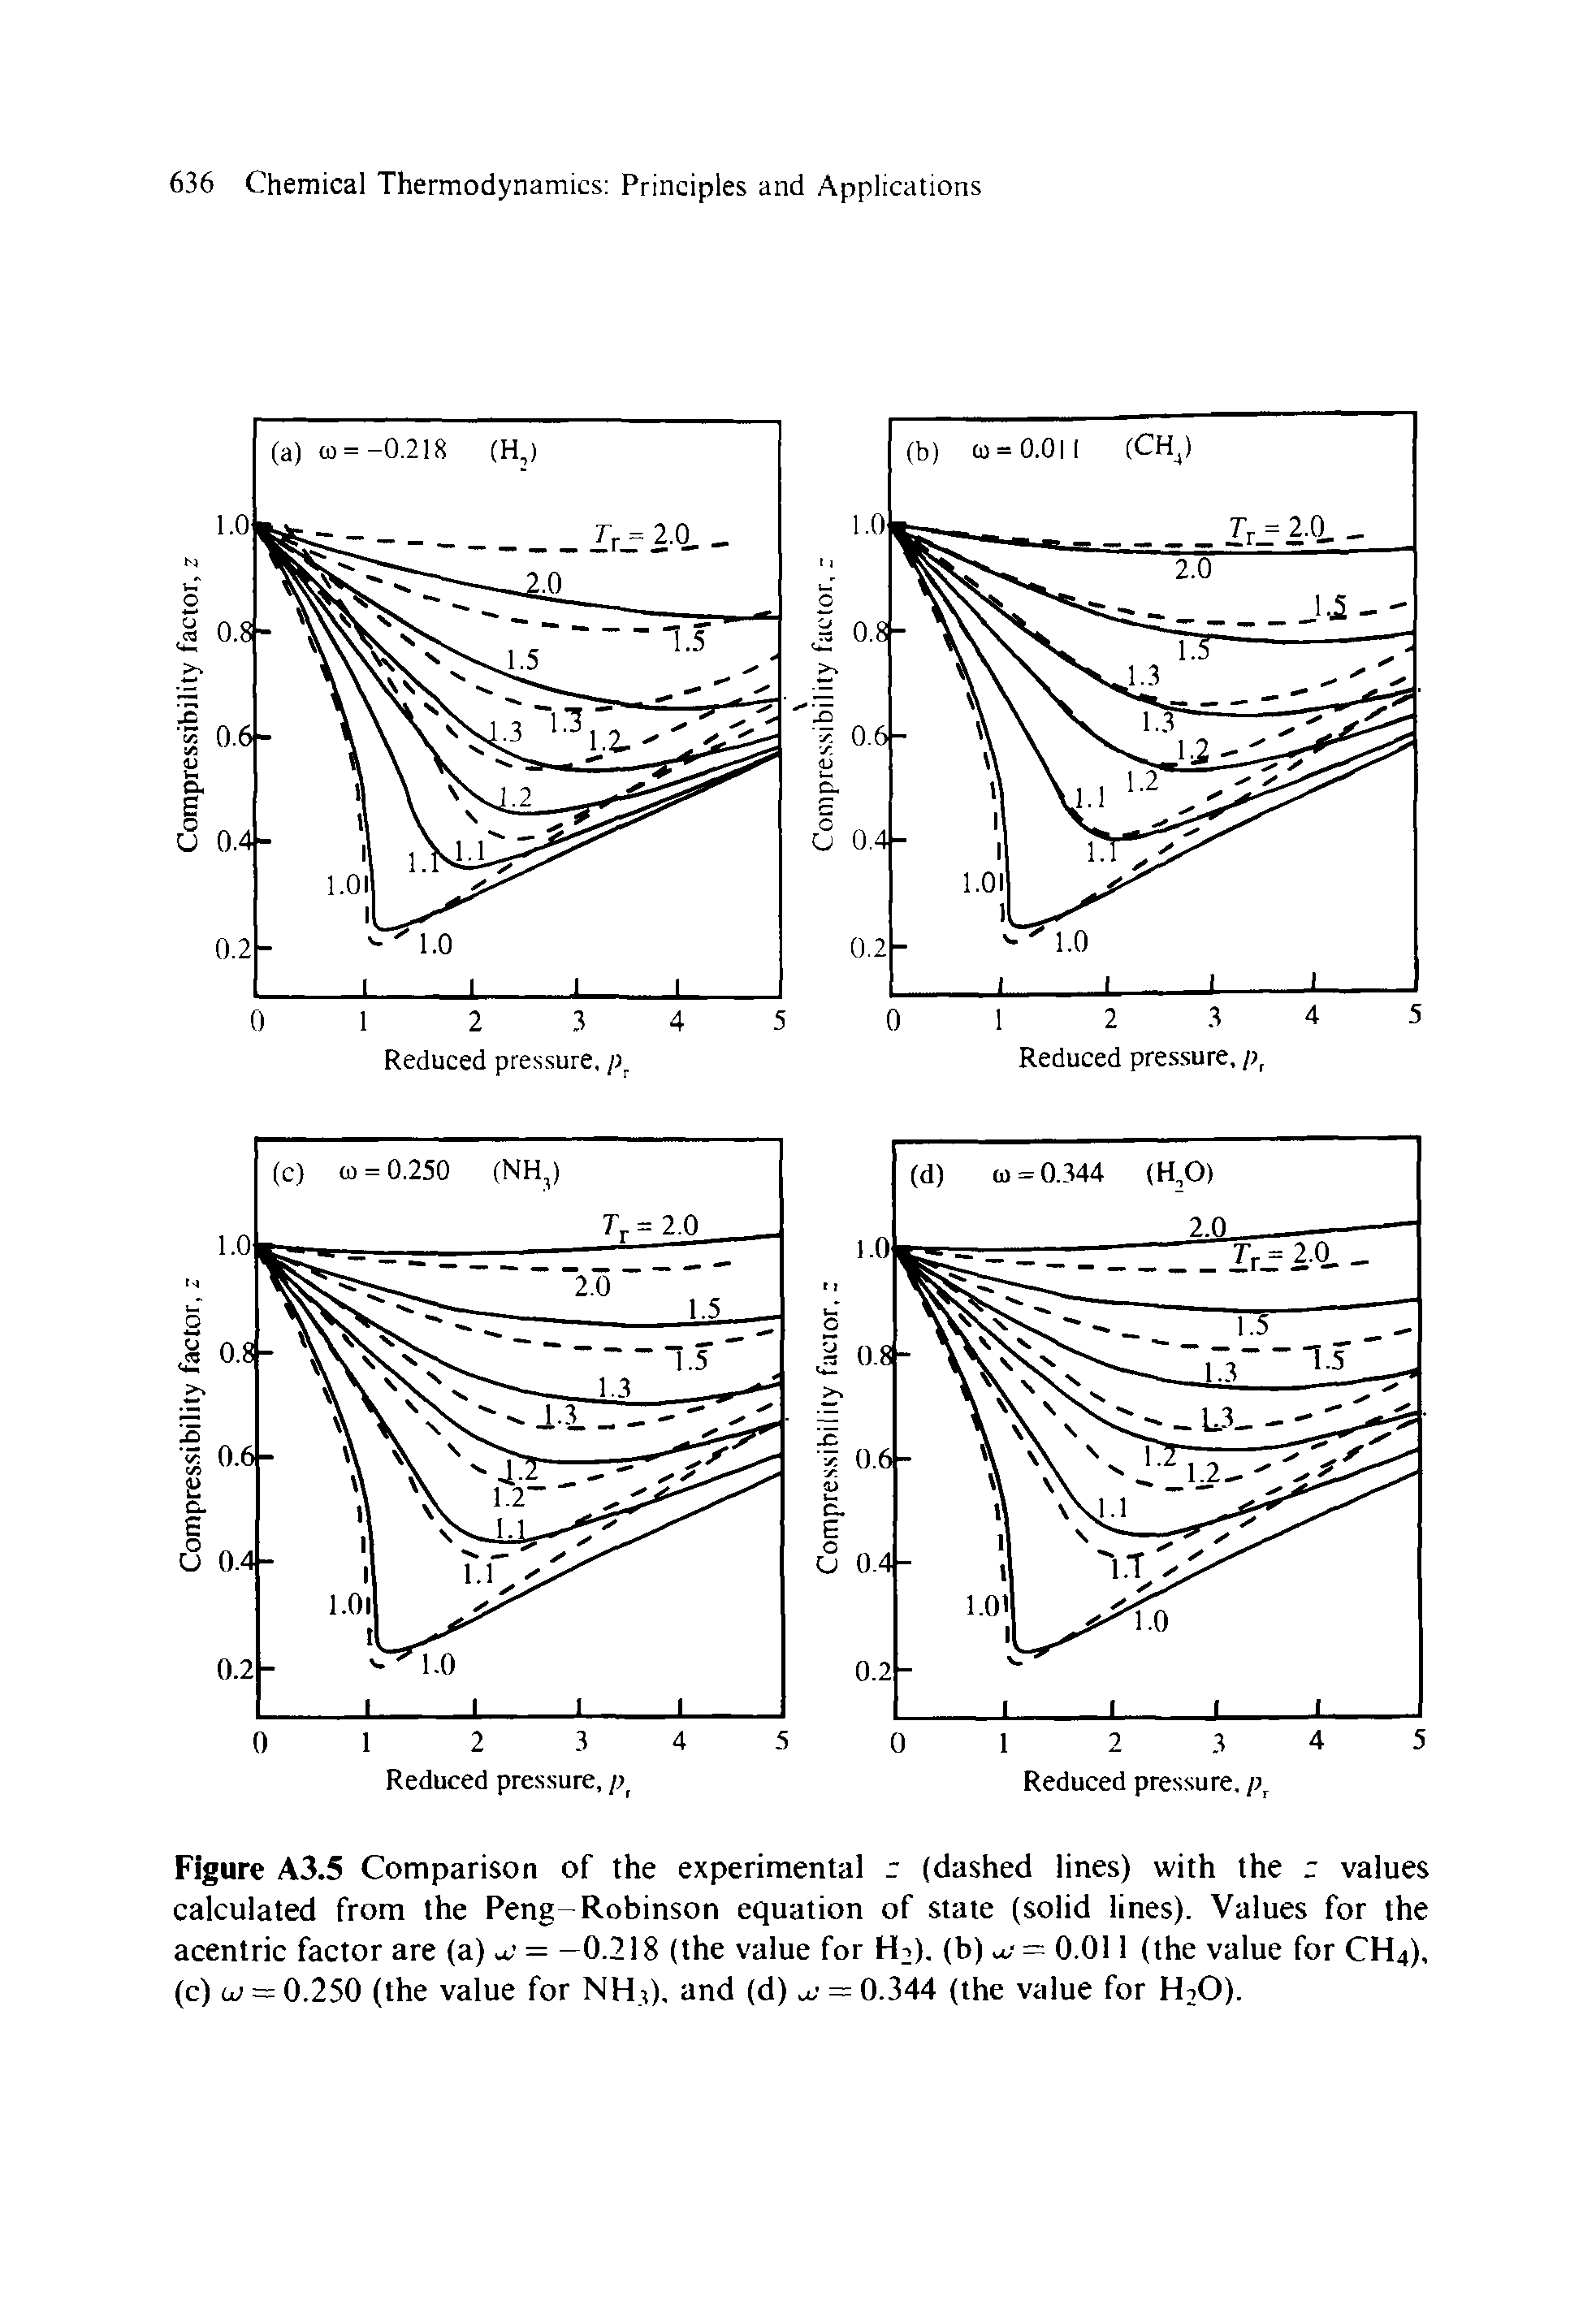 Figure A3.5 Comparison of the experimental r (dashed lines) with the r values calculated from the Peng-Robinson equation of state (solid lines). Values for the acentric factor are (a) = —0.218 (the value for HU), (b) = 0.011 (the value for CH4),...